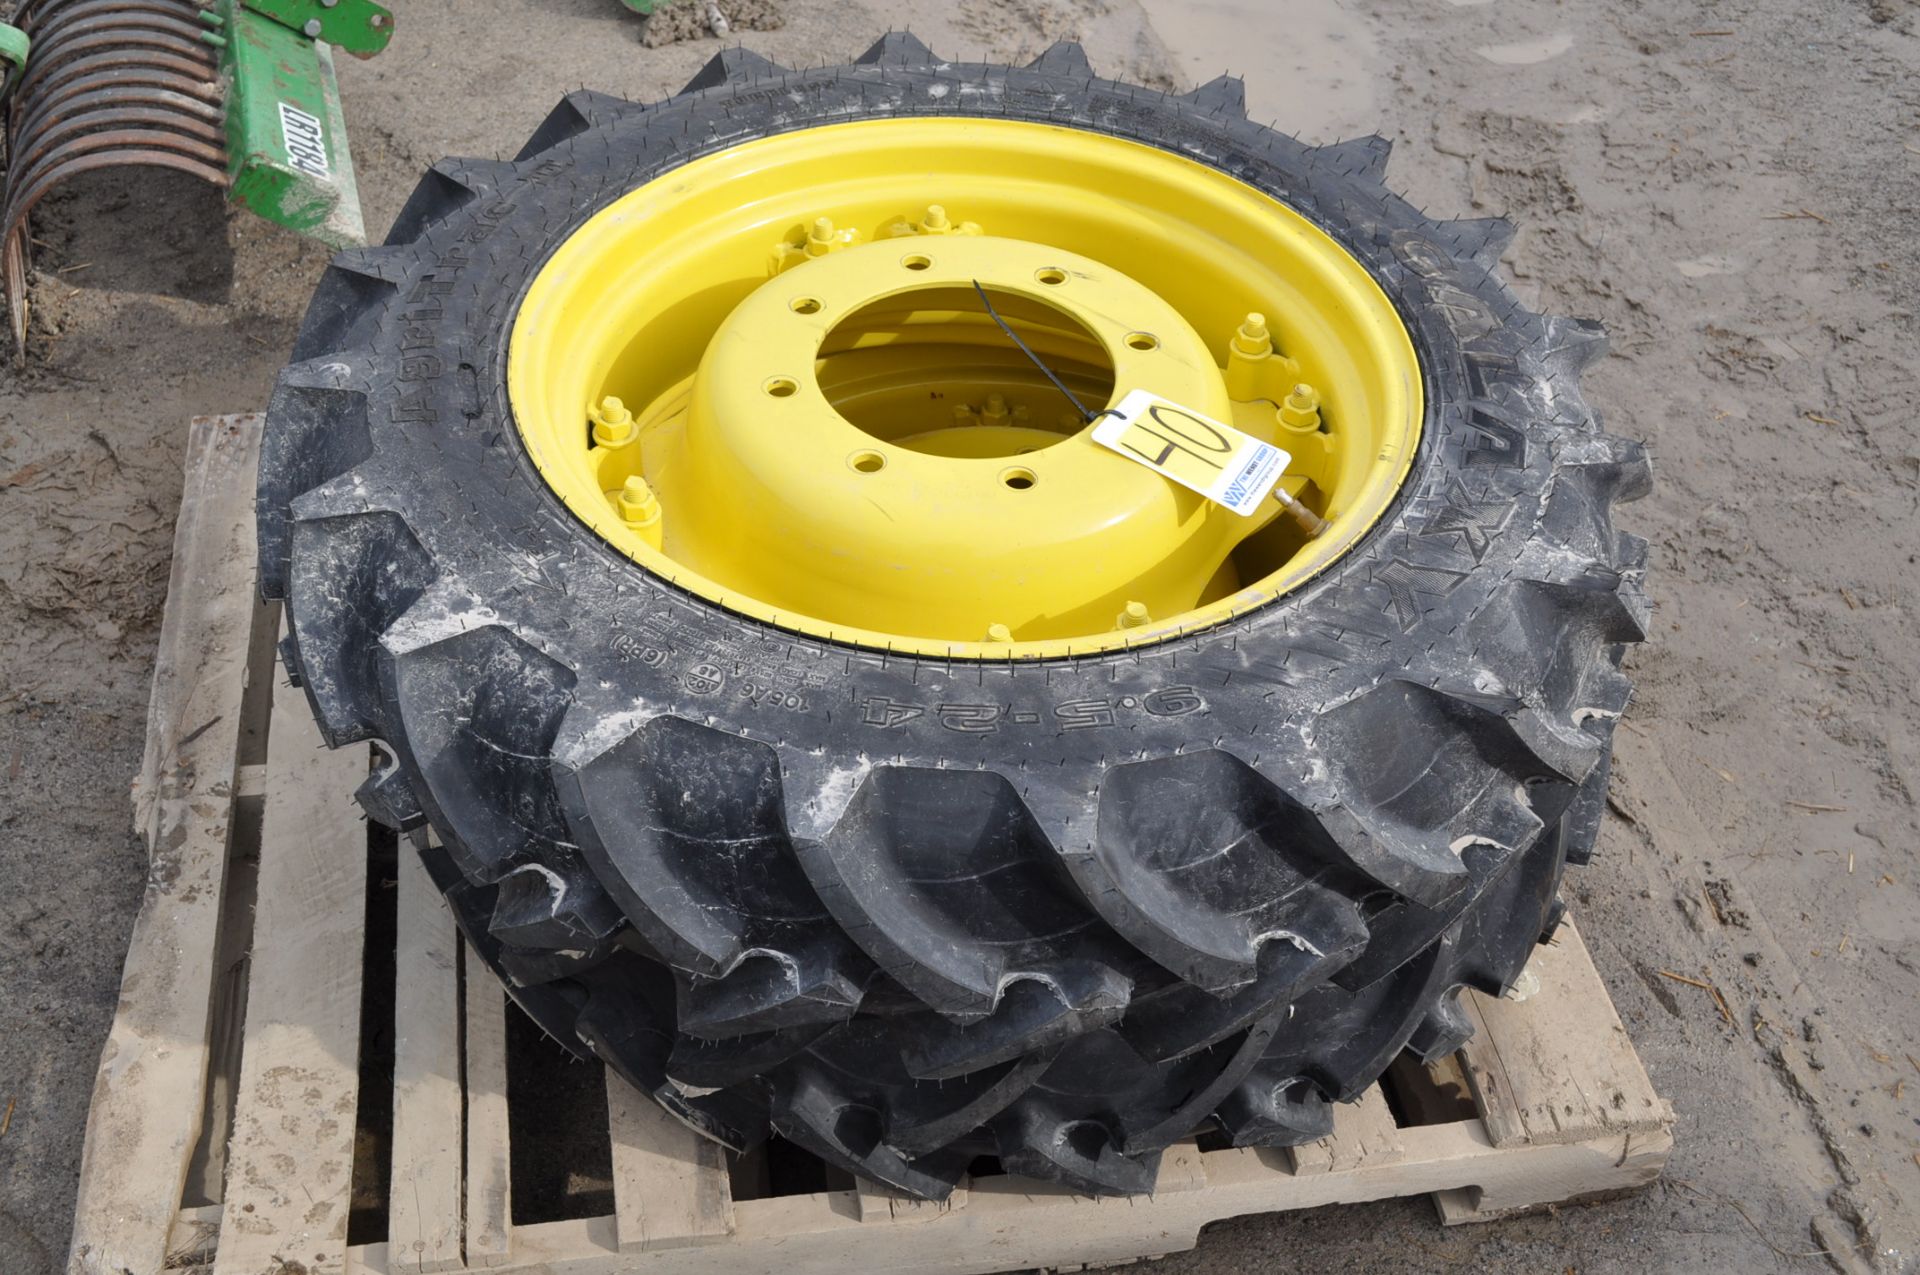 NEW Pair 9.5 – 24 tires on 8 bolt rims, fits John Deere 5000 series tractor